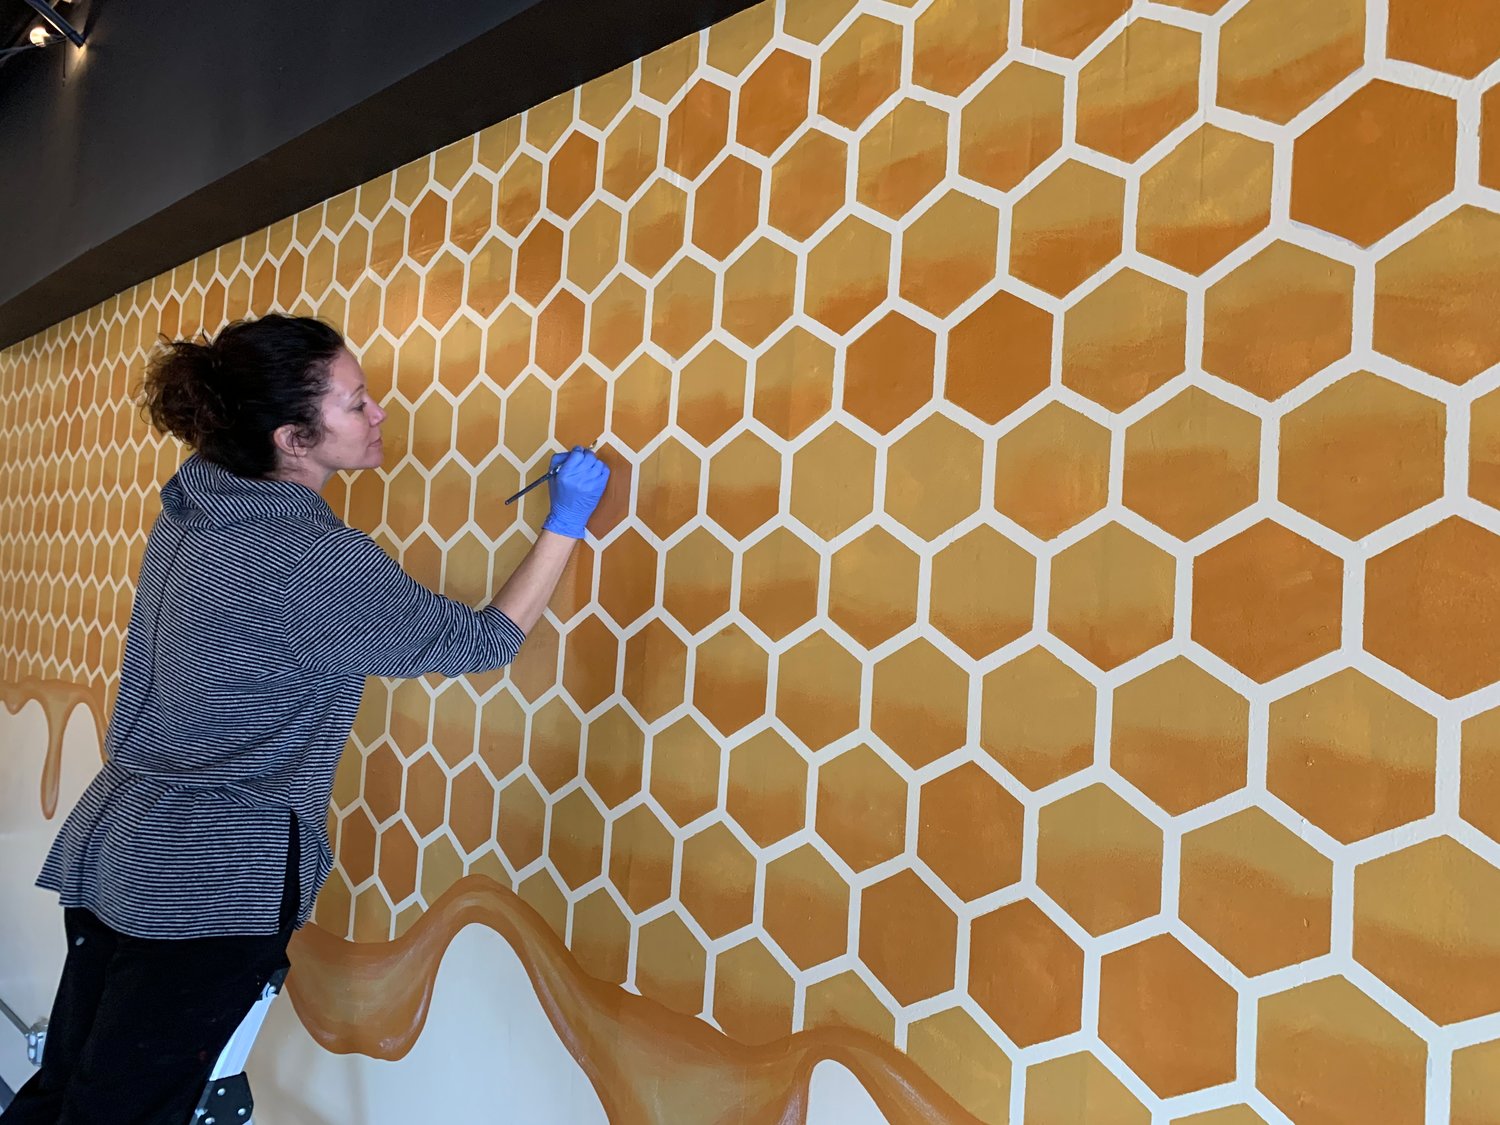 Christie Martin works on a honey-themed mural inside The Hive.